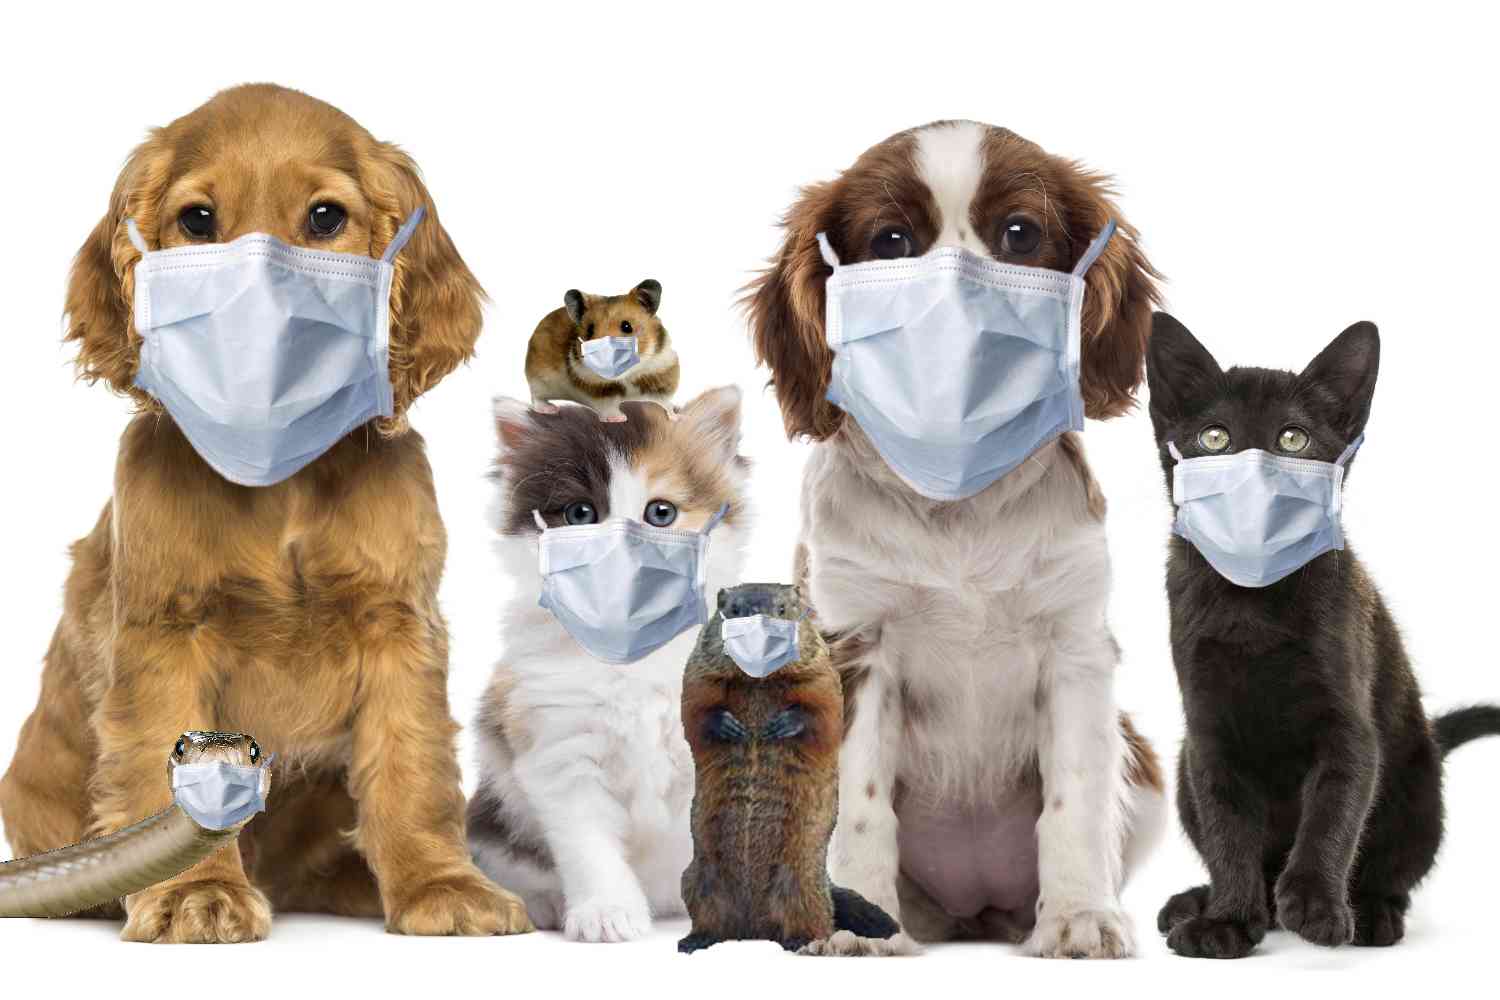 Scientists: We might not be able to return to normal until we vaccinate our pets. | Not the Bee